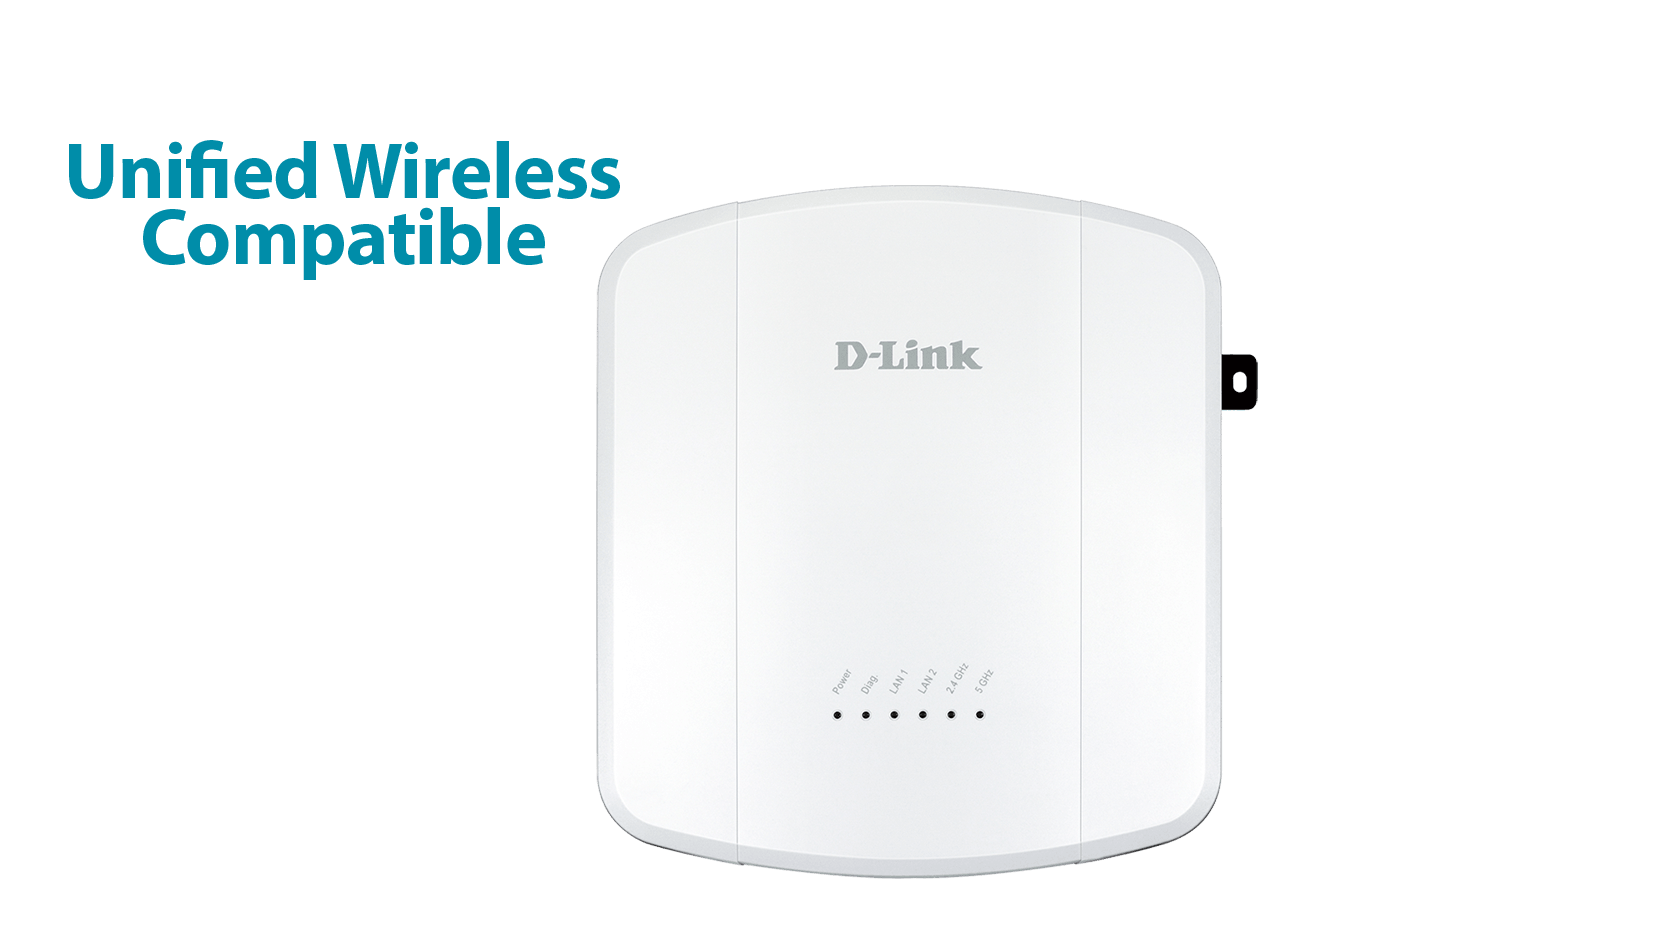 Unified Wireless Concurrent Dual Band 802.11ac Access Point / D-Link Corporation